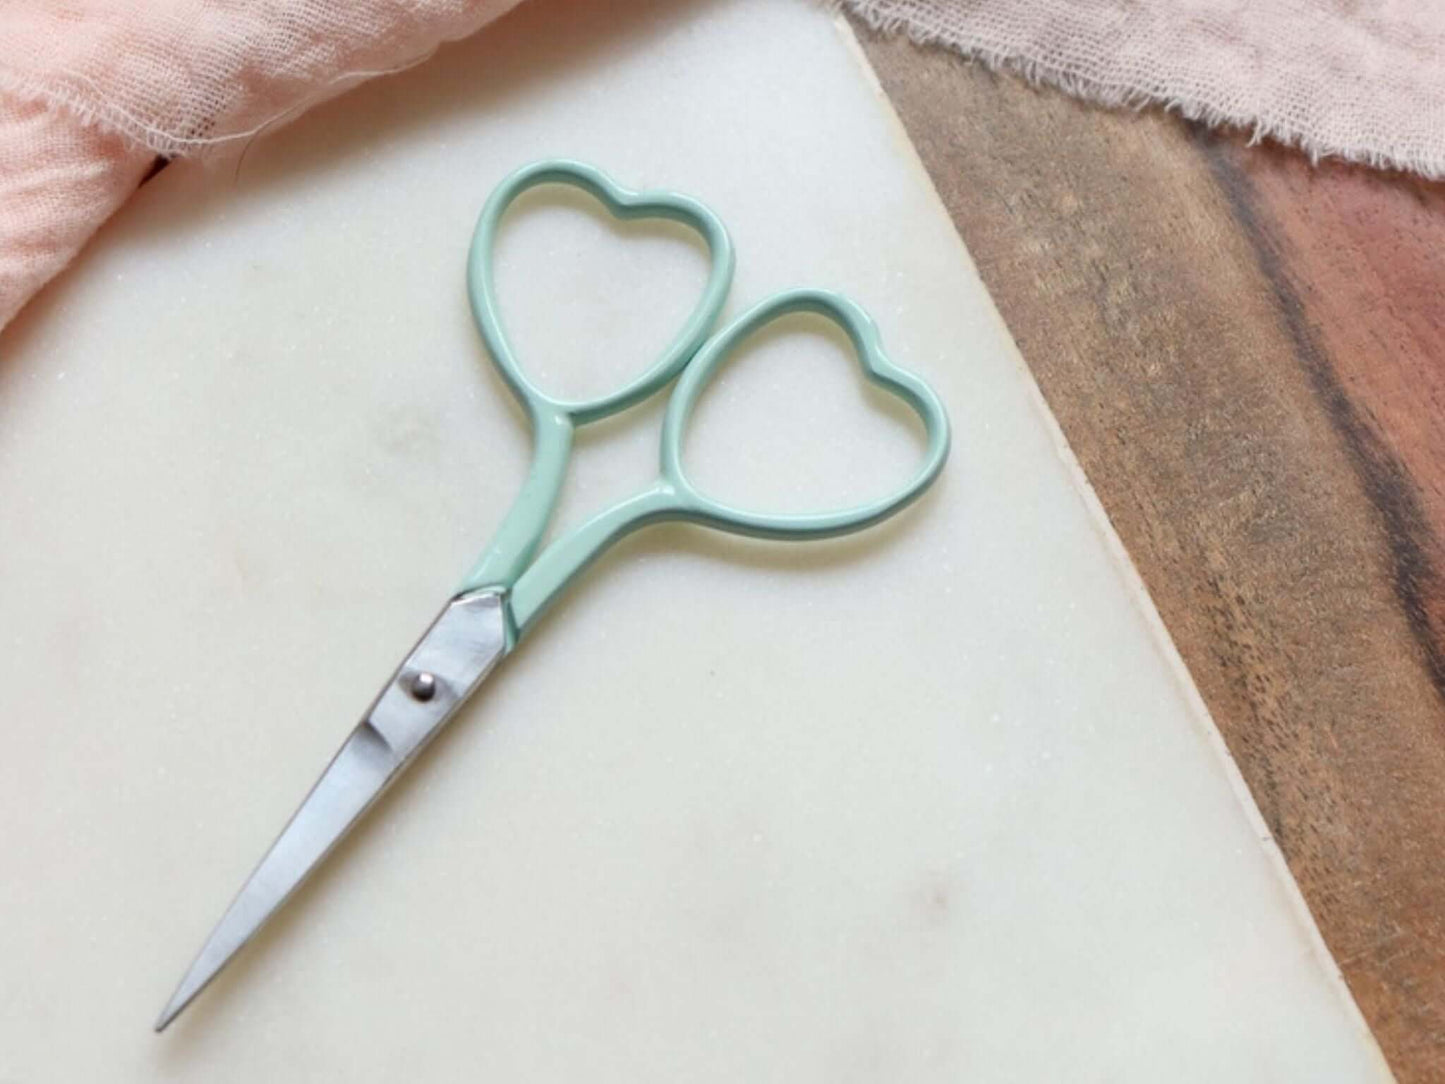 Heart shaped embroidery scissors in a mint green color